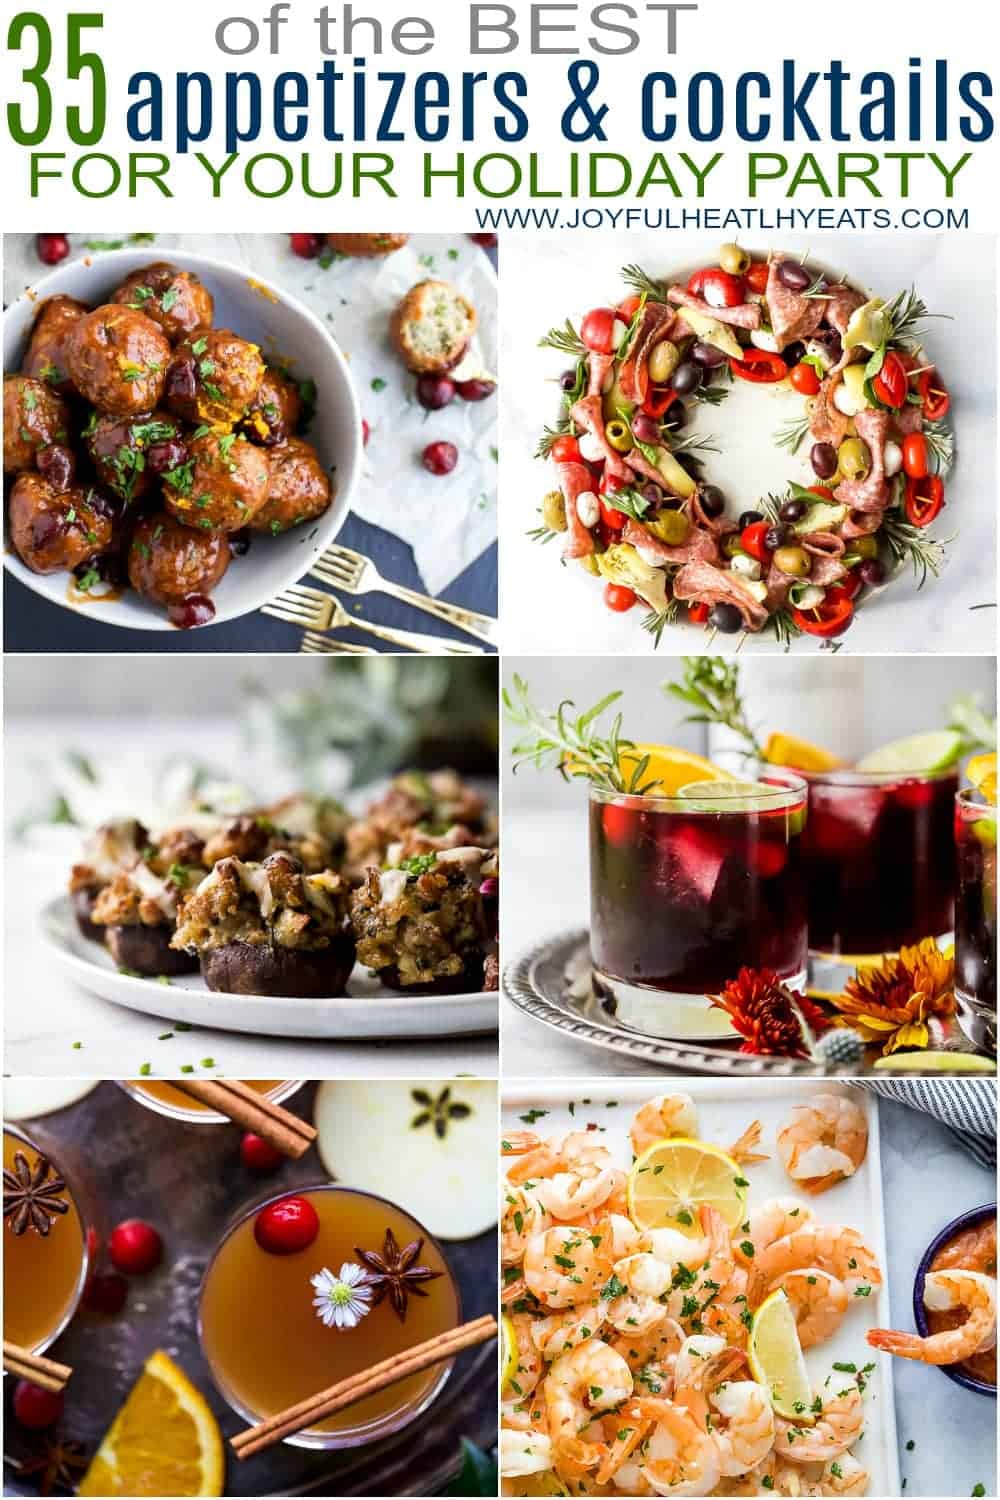 pinterest image for the best 35 appetizers and cocktails for your holiday party